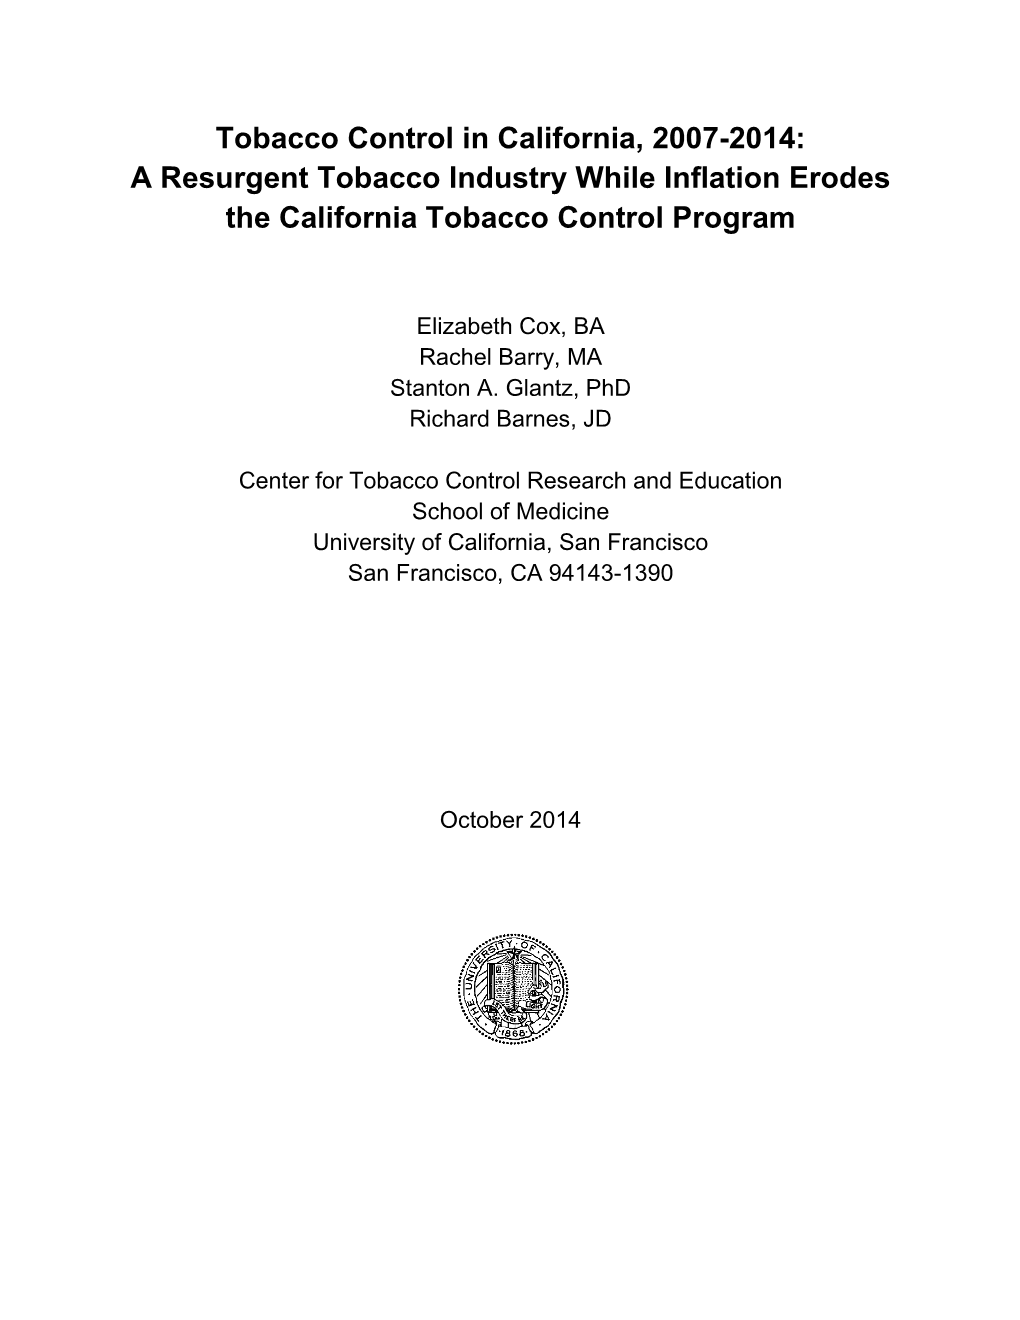 Tobacco Control in California, 2007-2014: a Resurgent Tobacco Industry While Inflation Erodes the California Tobacco Control Program